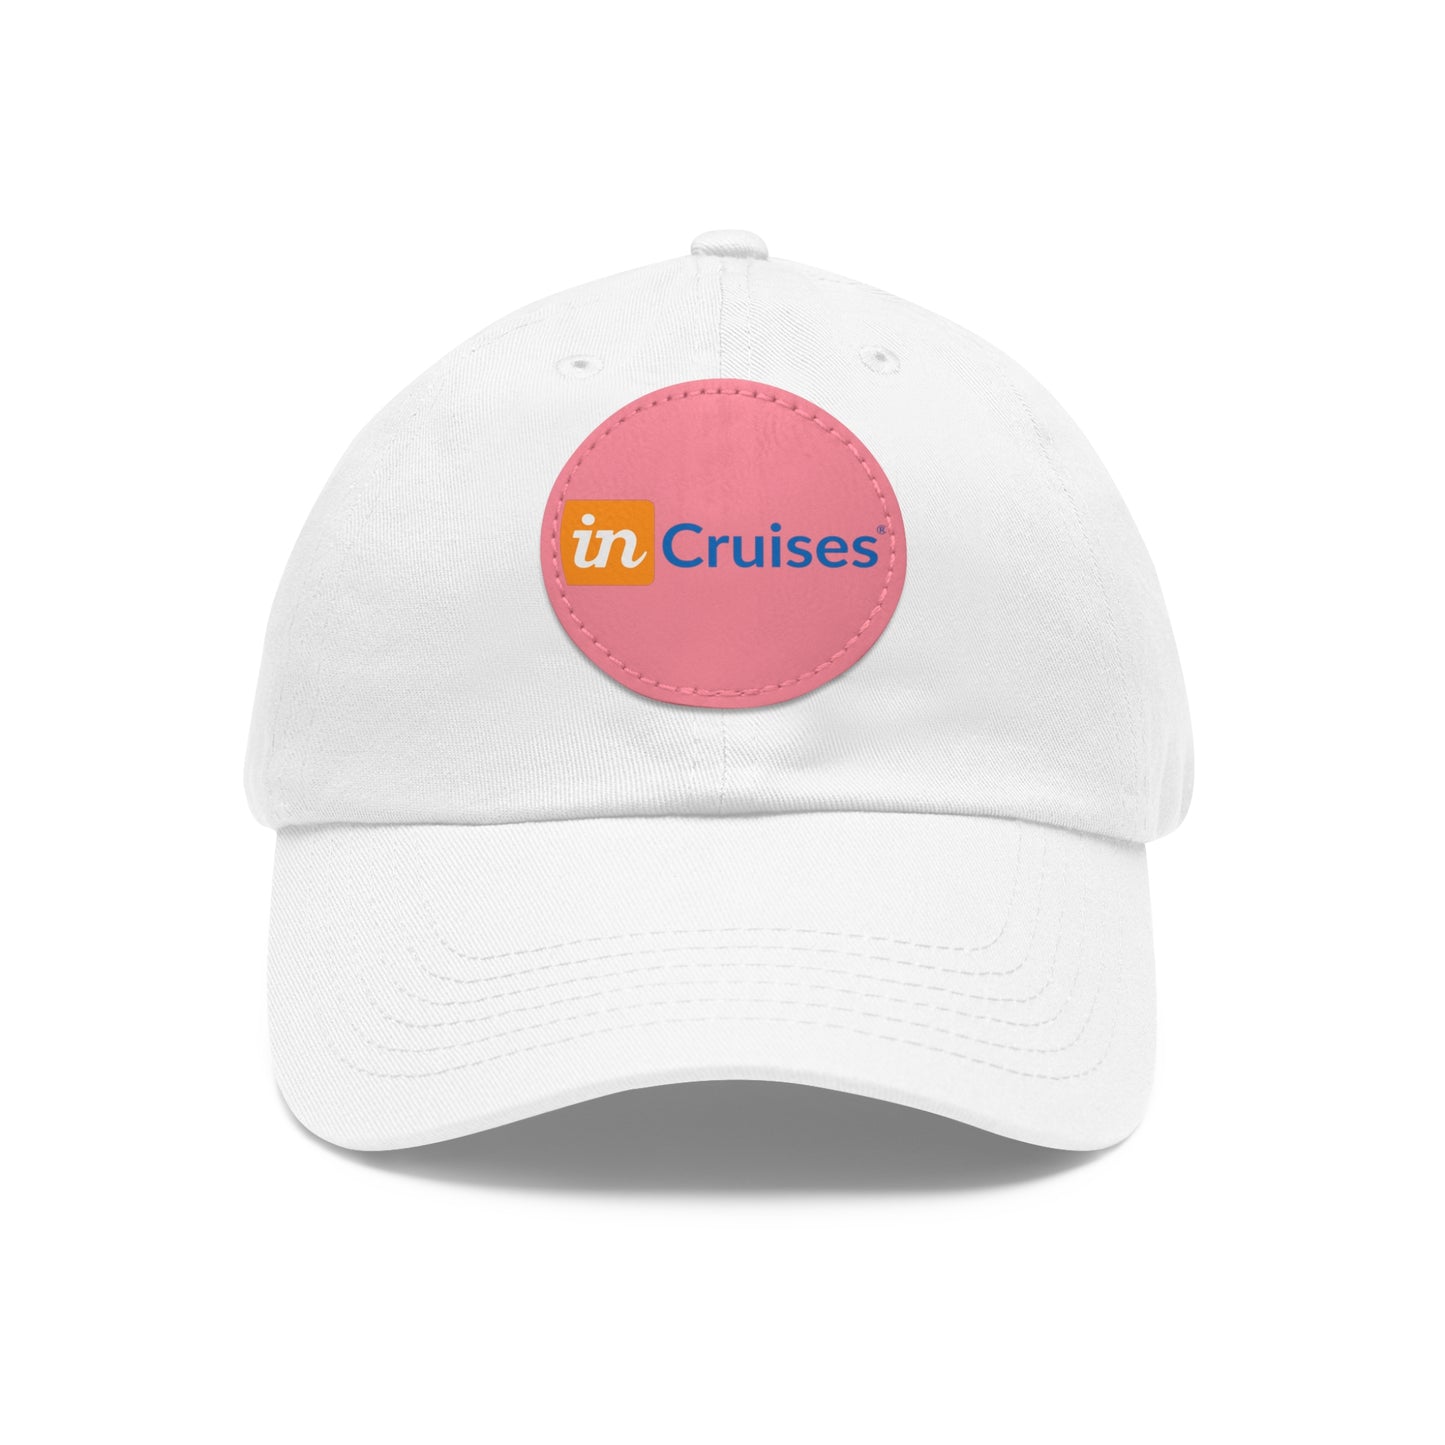 InCruises Hat with Leather Patch (Round)